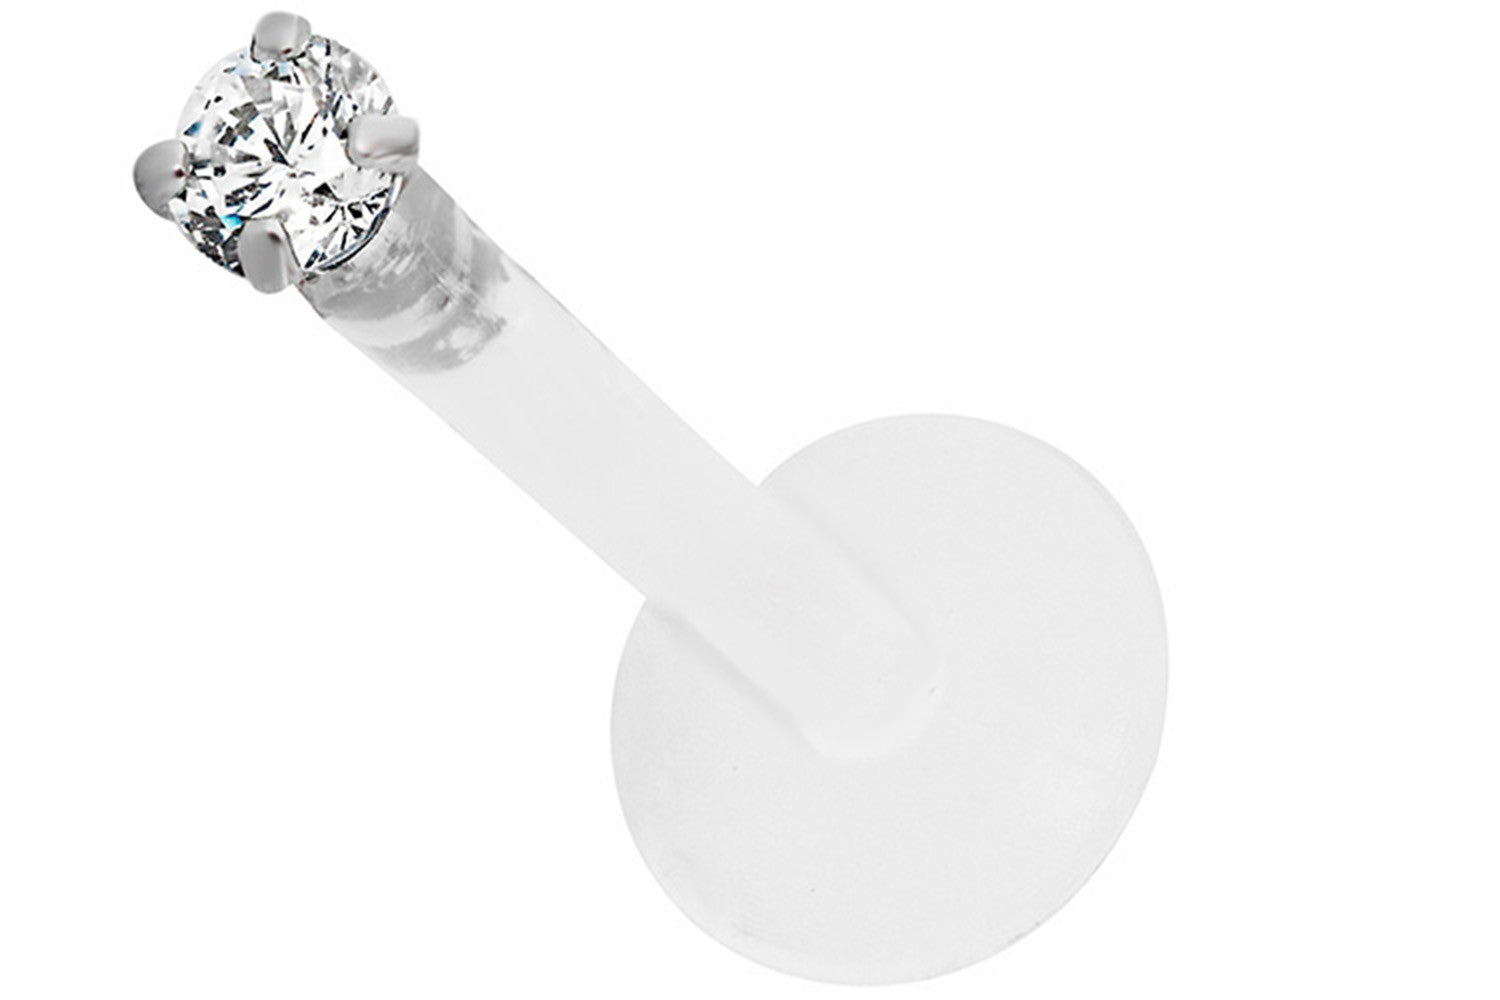 This labret & monroe piercing jewelry is made with safe bio-compatible BioFlex material and a Cubic Zirconia crystal.